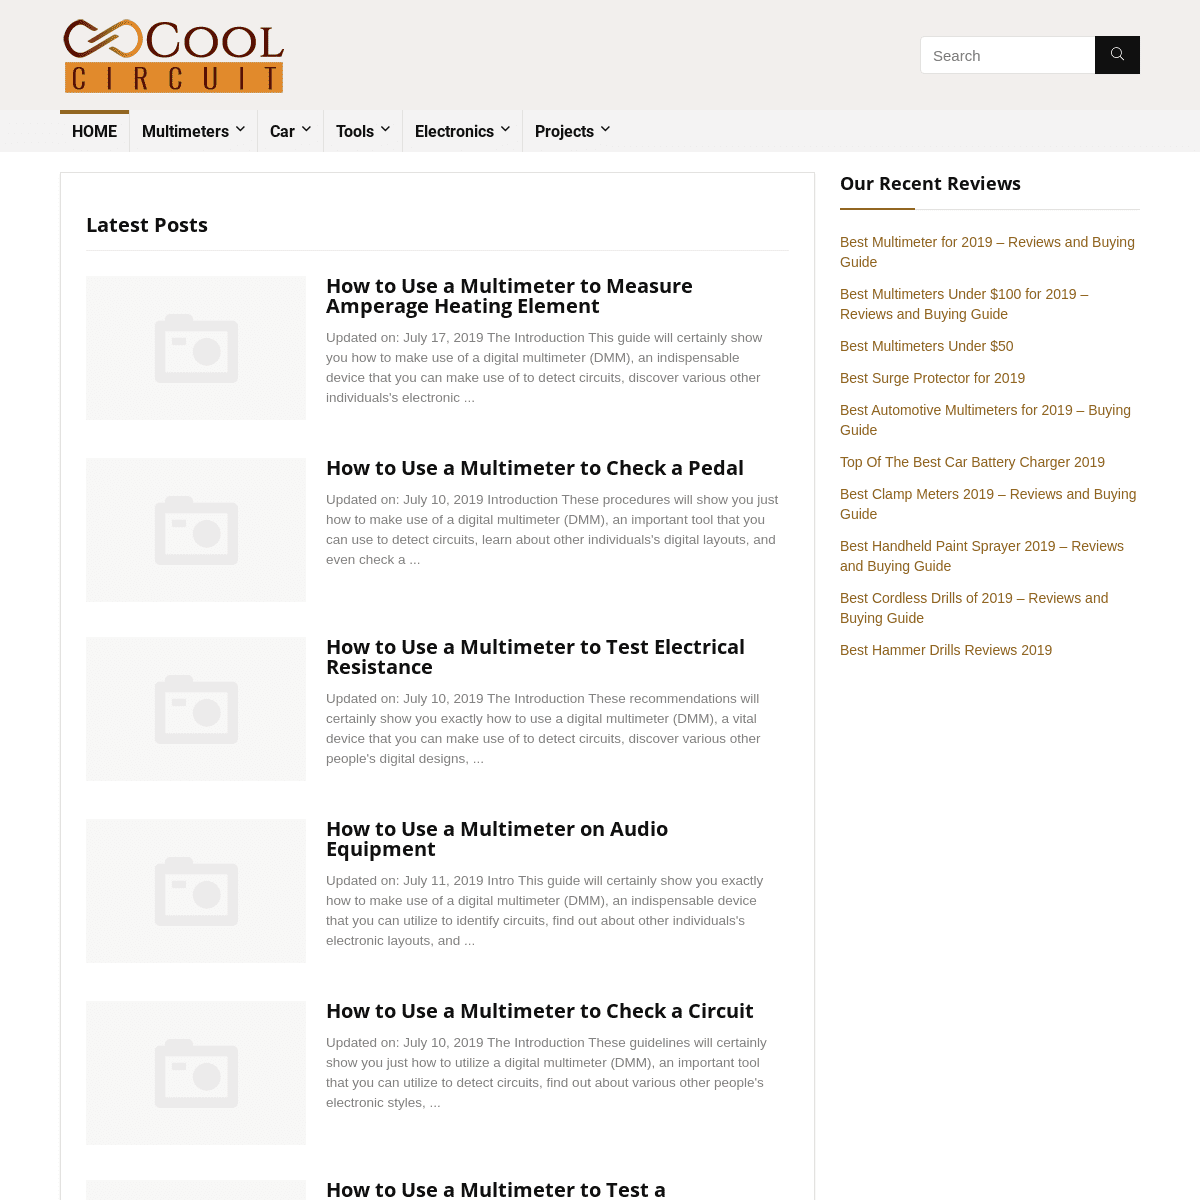 A complete backup of coolcircuit.com